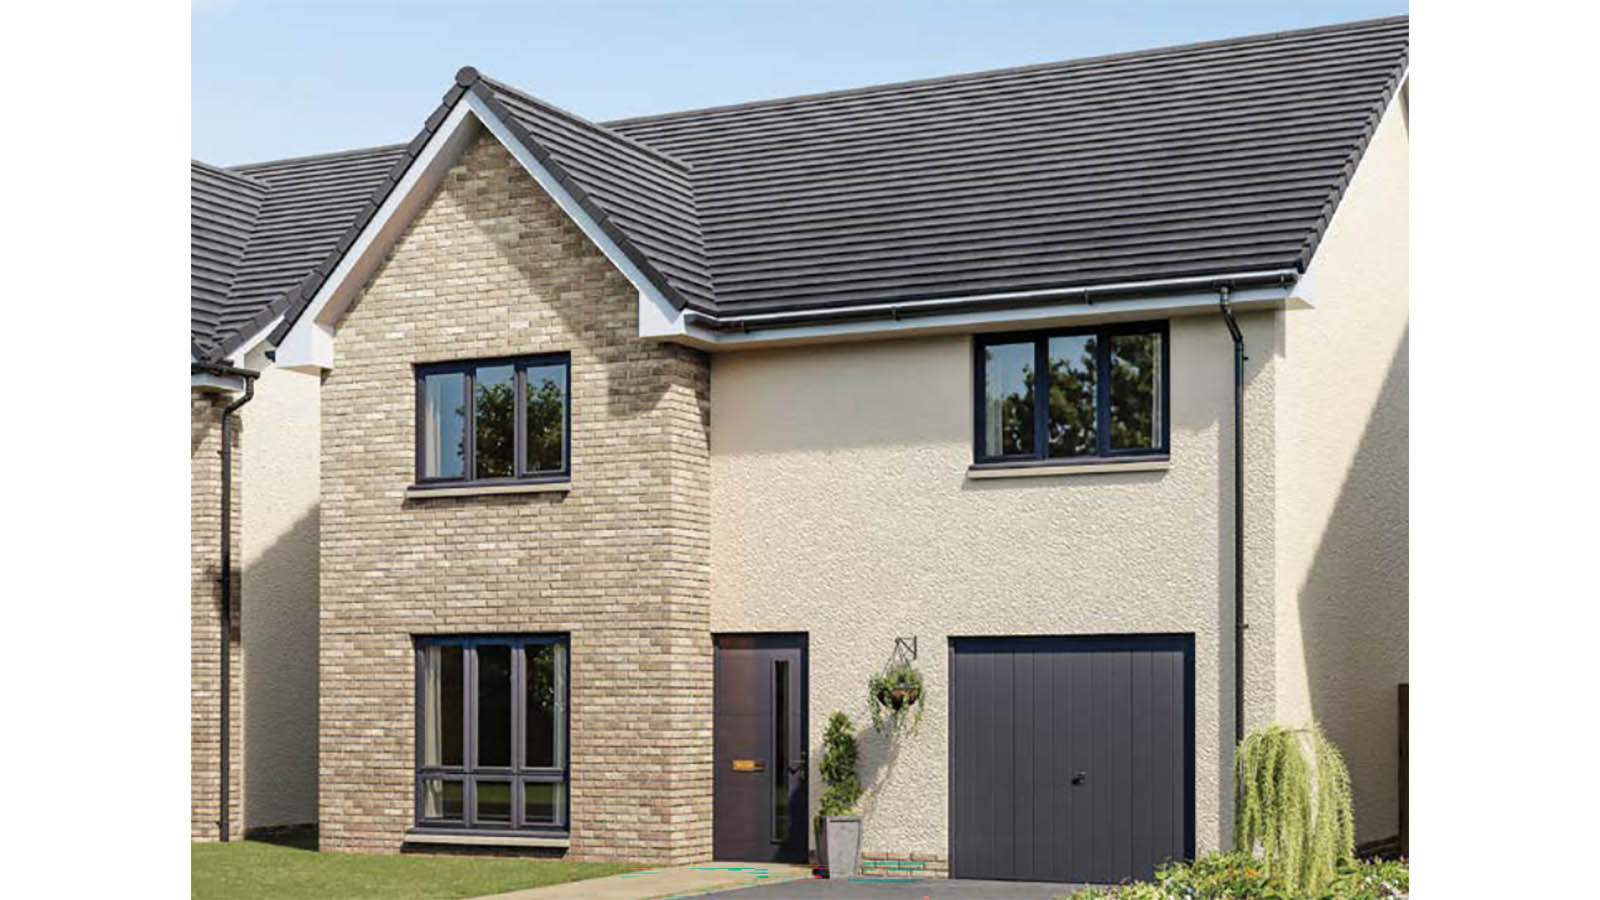 The ‘Gullane’ house type from Lovell Homes